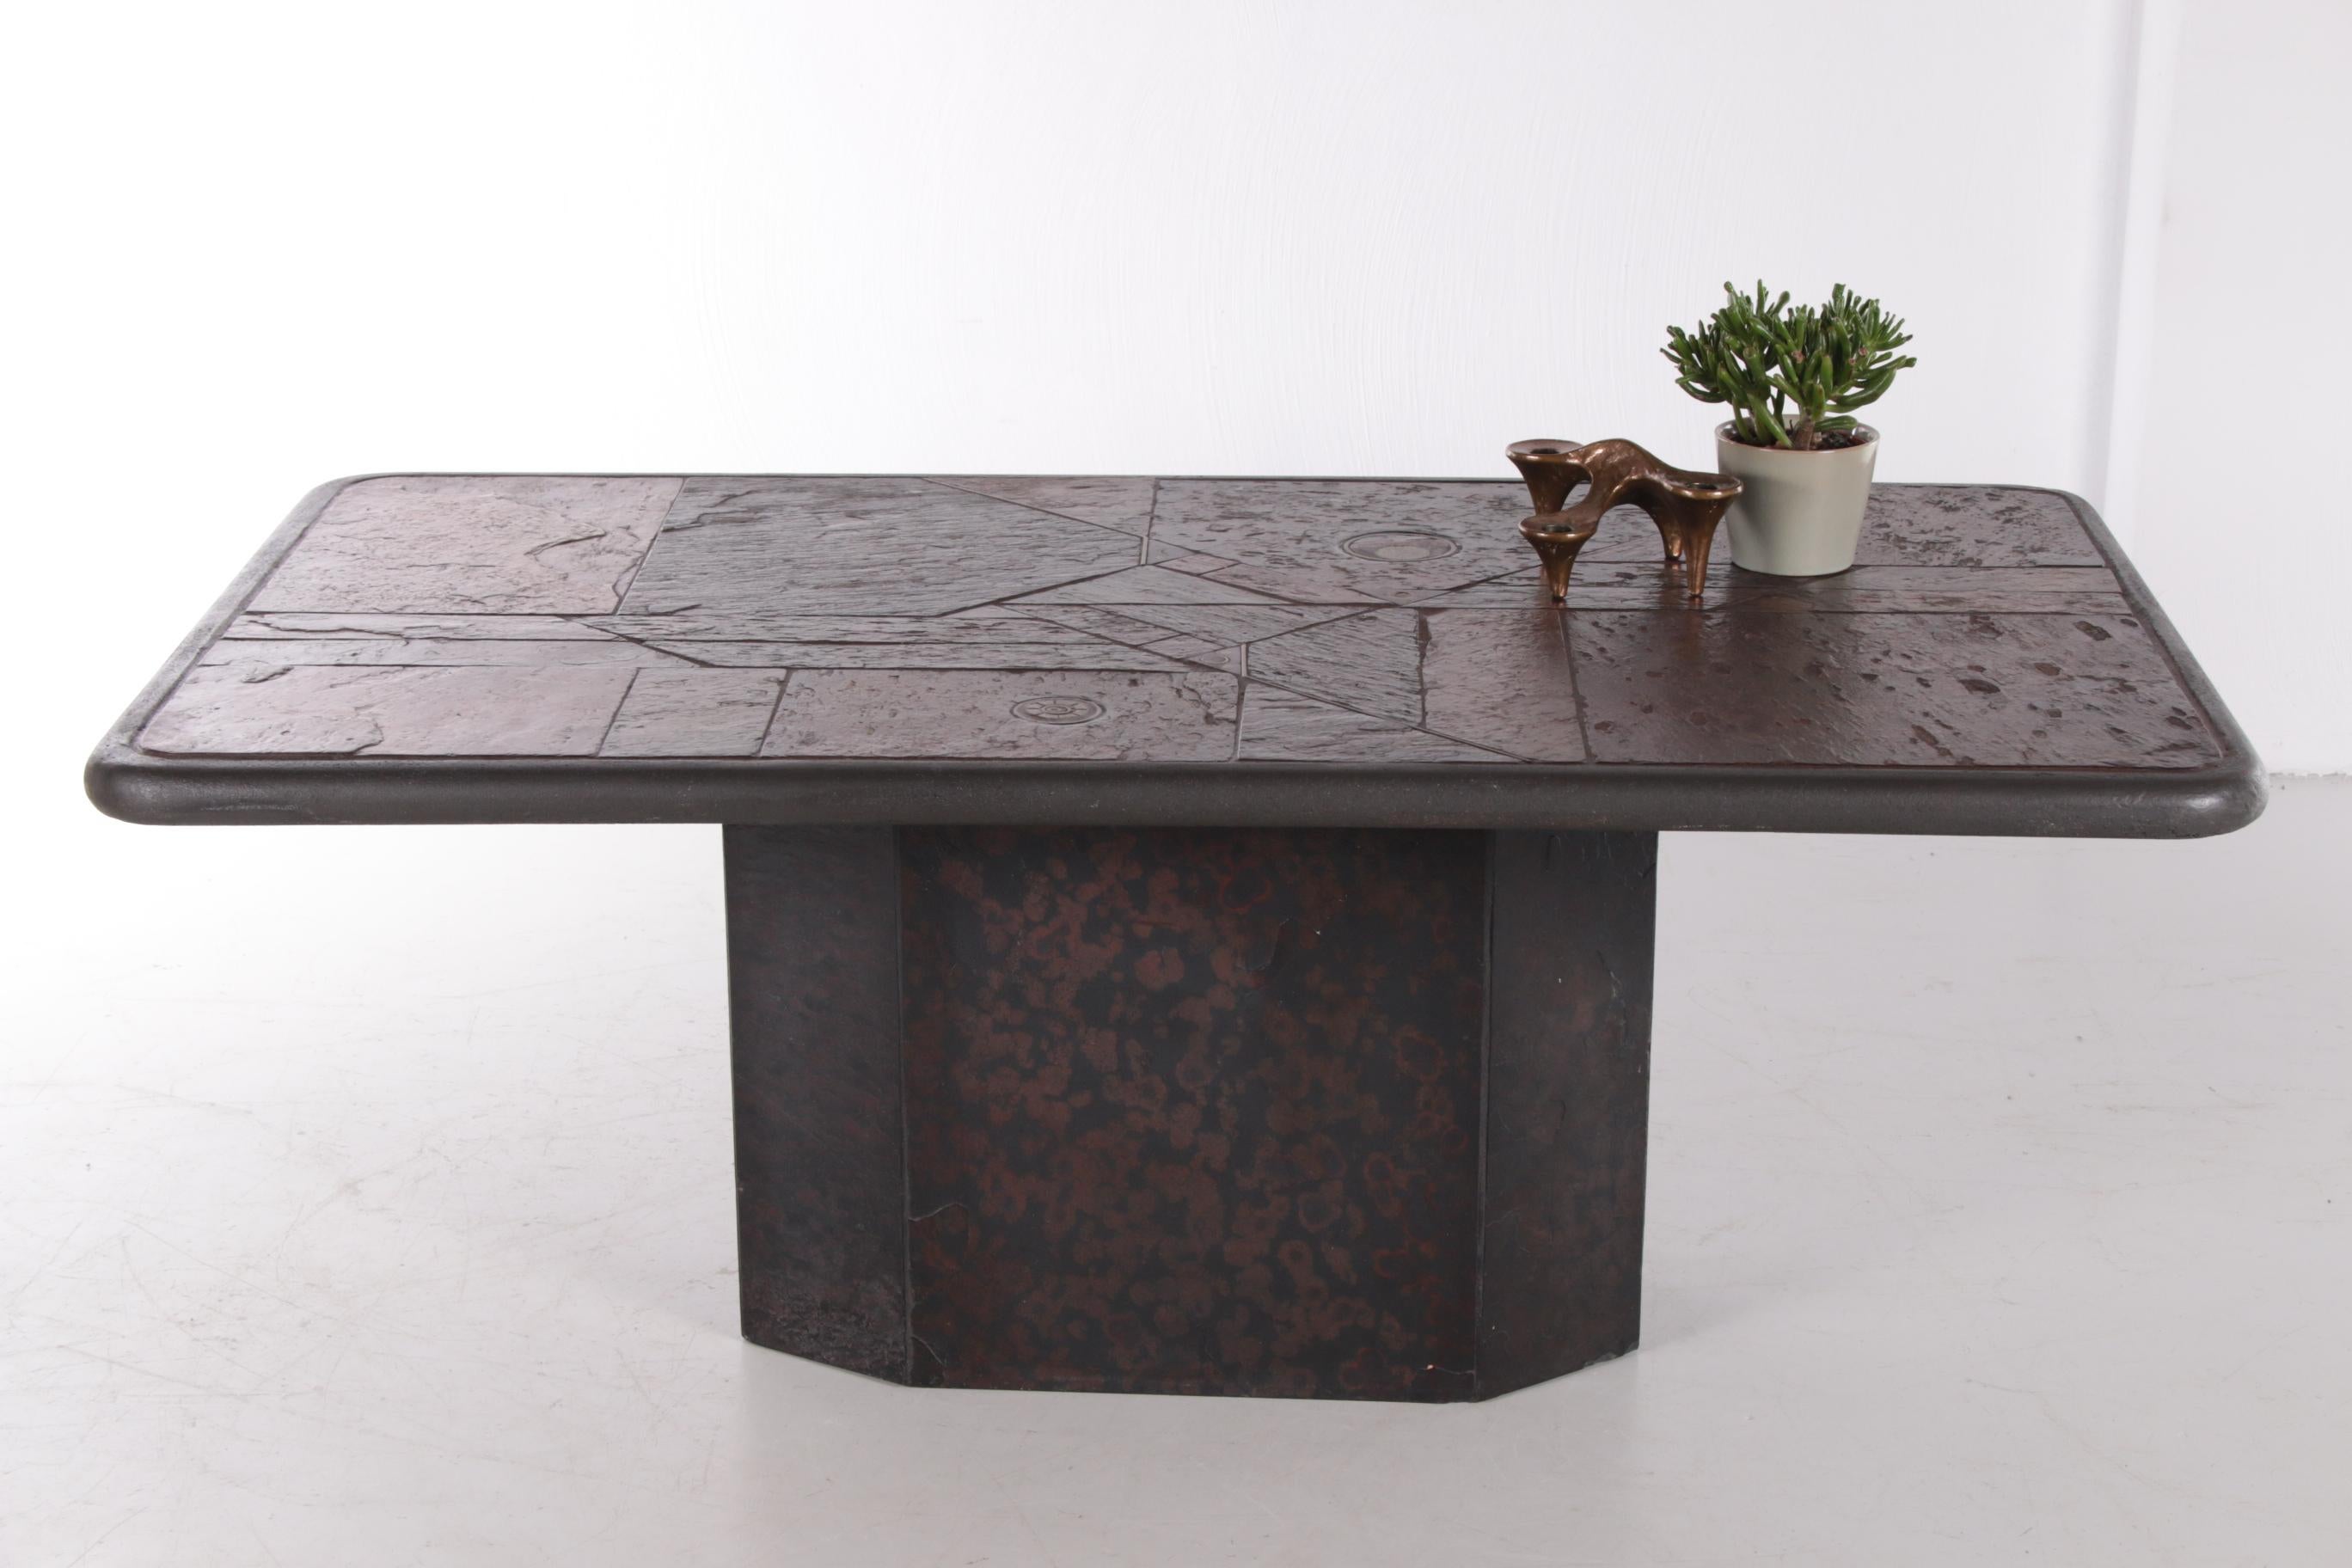 A unique brutalist coffee table by the Dutch artist and designer Paul Kingma, made in the 1980s.

The table is inlaid with pieces of natural stone and brass details. With this, the designer wanted to evoke the idea of the earth and its history,